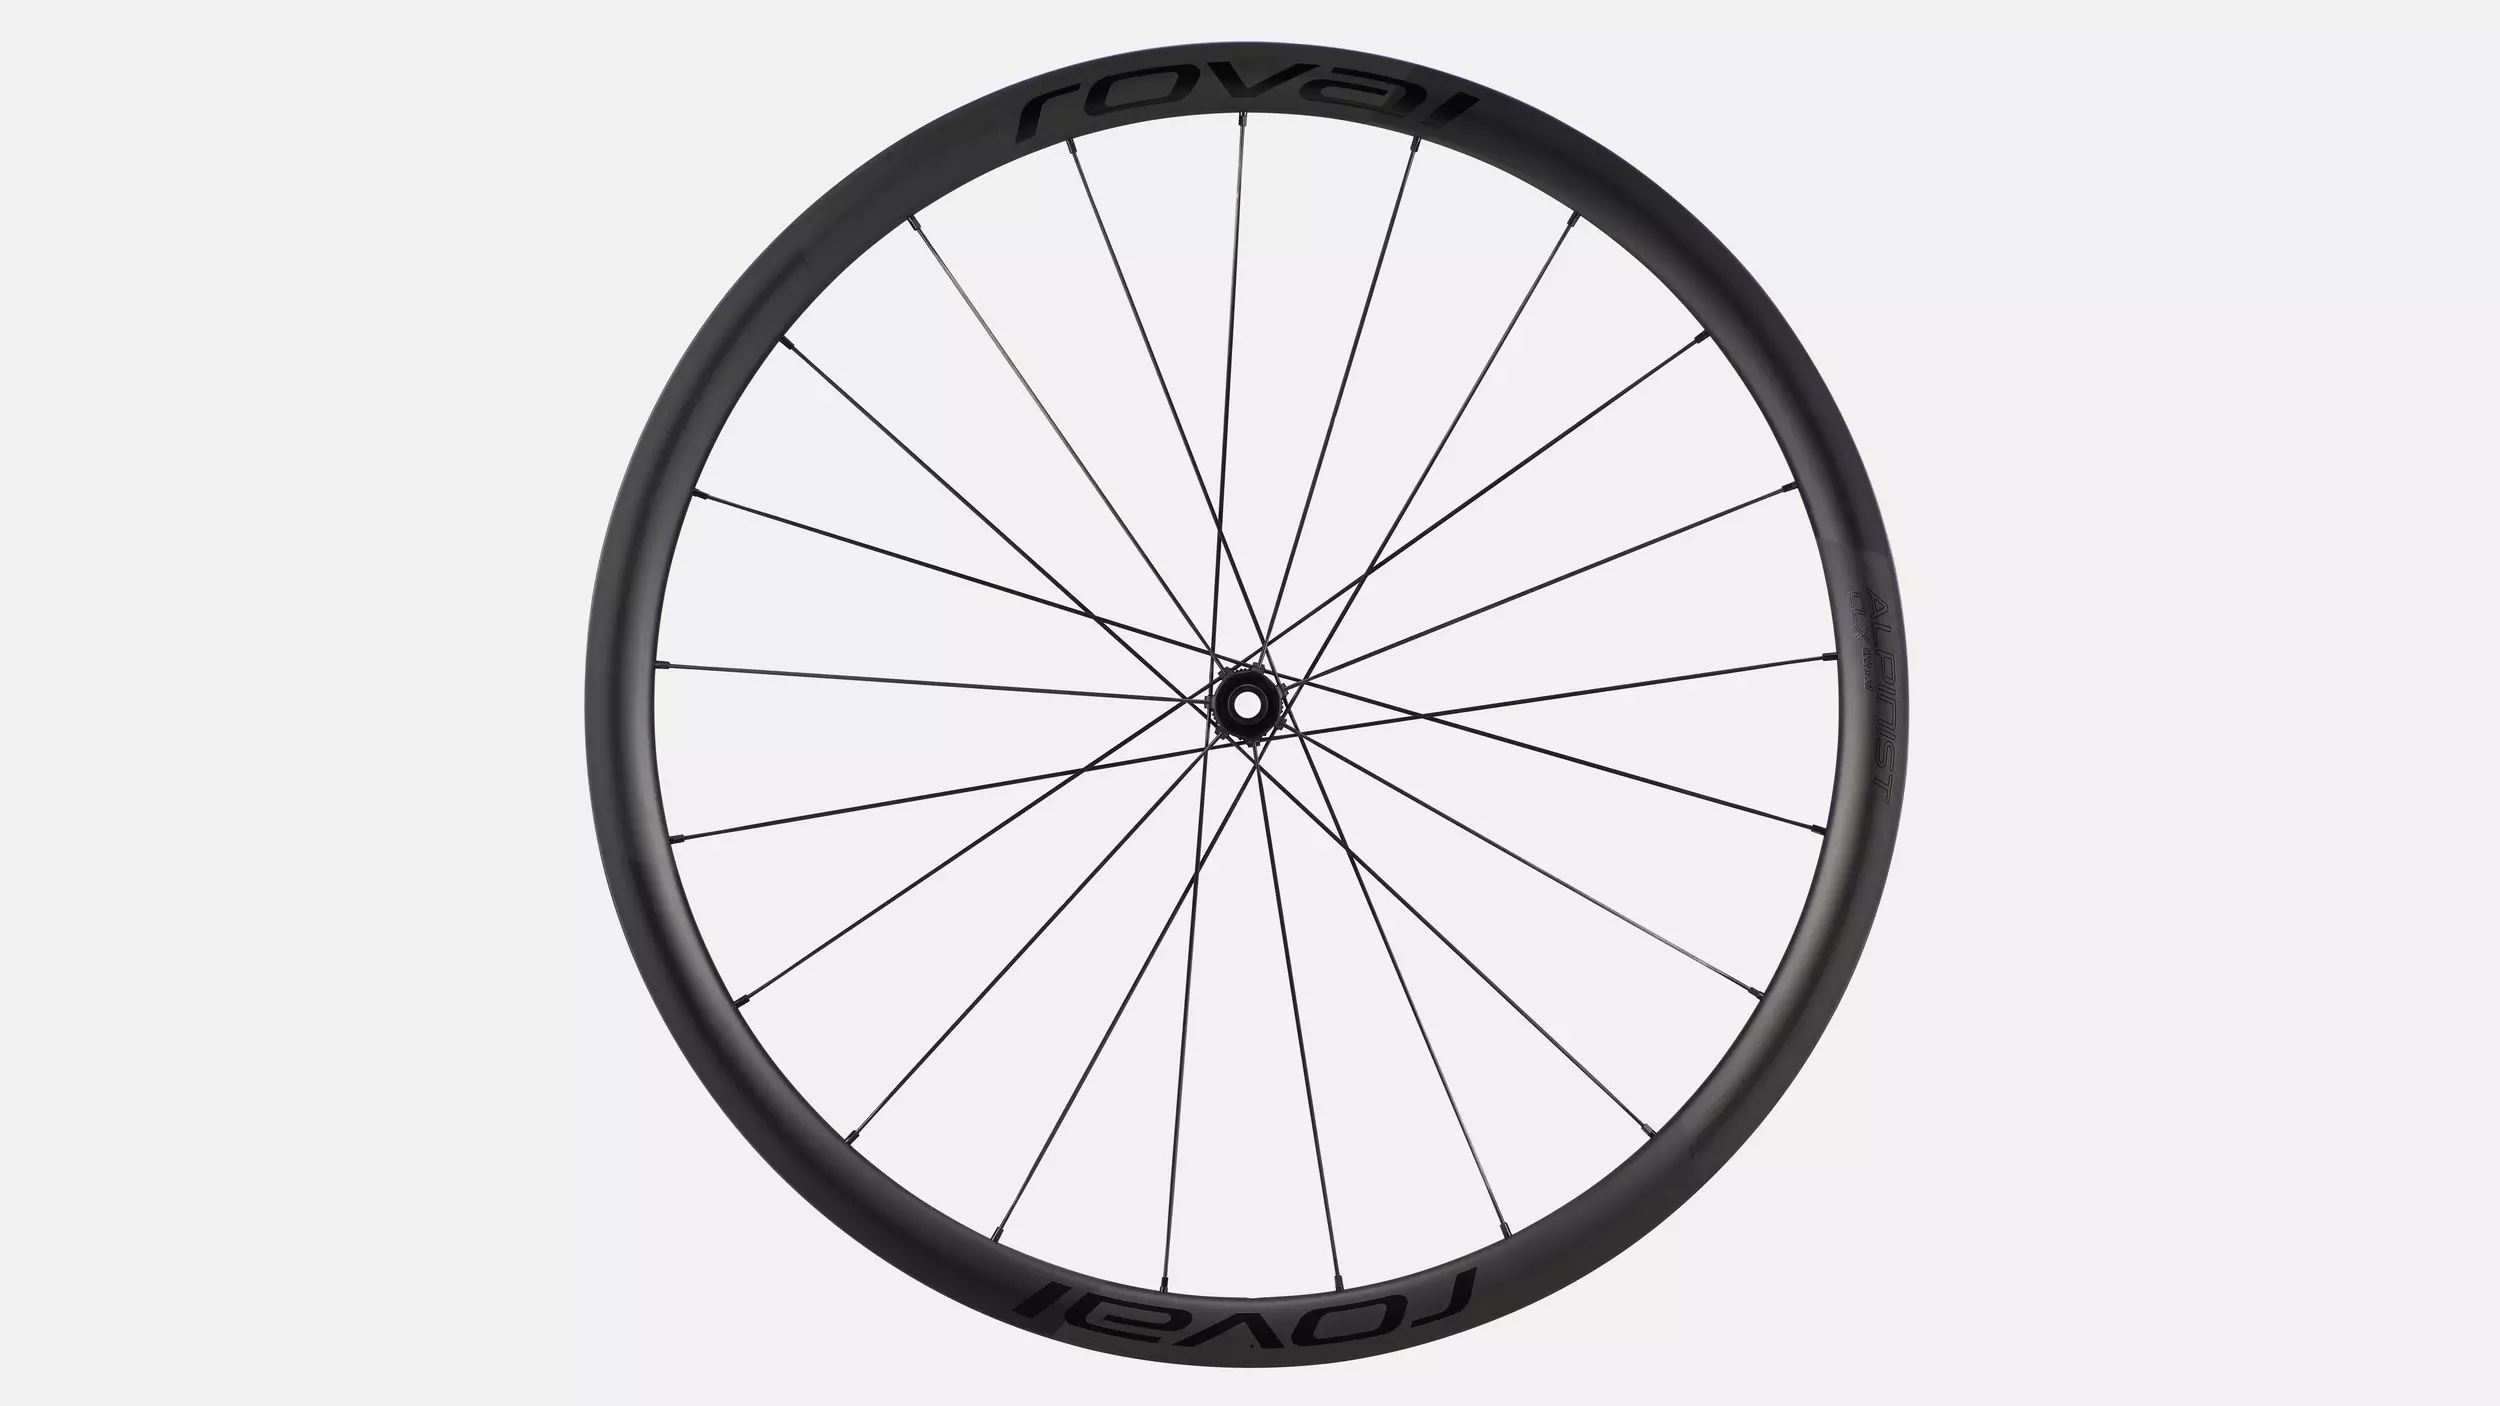 30022-540_WHL_ALPINIST-CLX-TUBELESS-SATIN-CARBON-GLOSS-BLK-700C_FRONT-SIDE_182440.jpeg